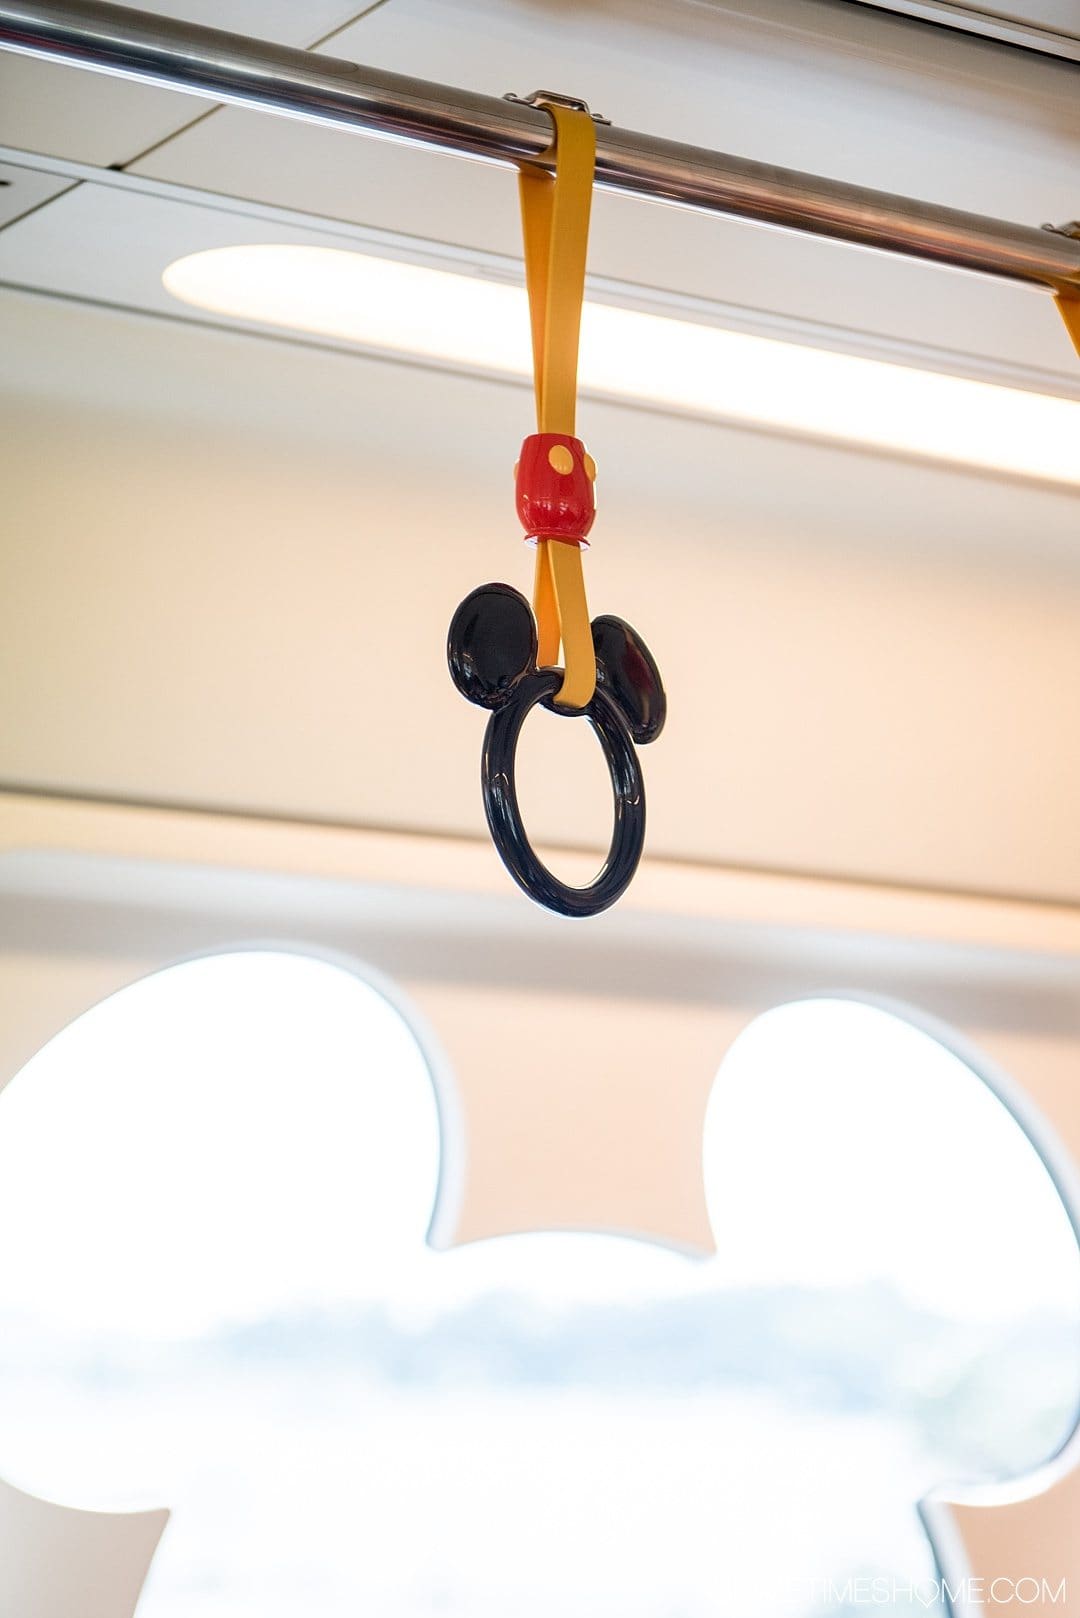 The Ultimate First-Timer's Guide to Tokyo DisneySea on Sometimes Home travel blog. Photo of a Mickey Mouse head hand hold and window on a monorail car.